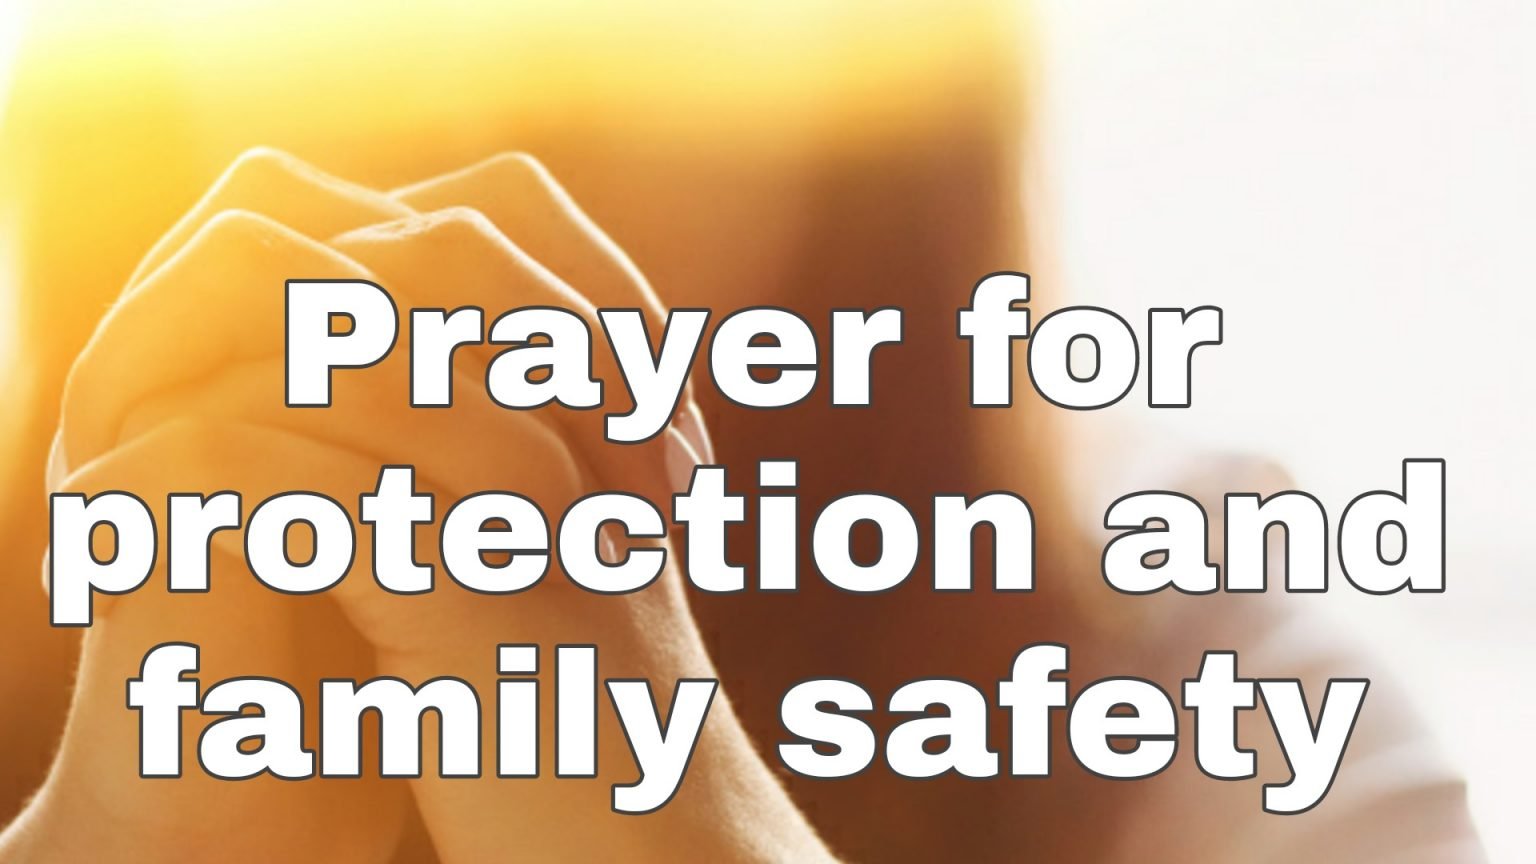 22 Prayers for Protection and Family Safety